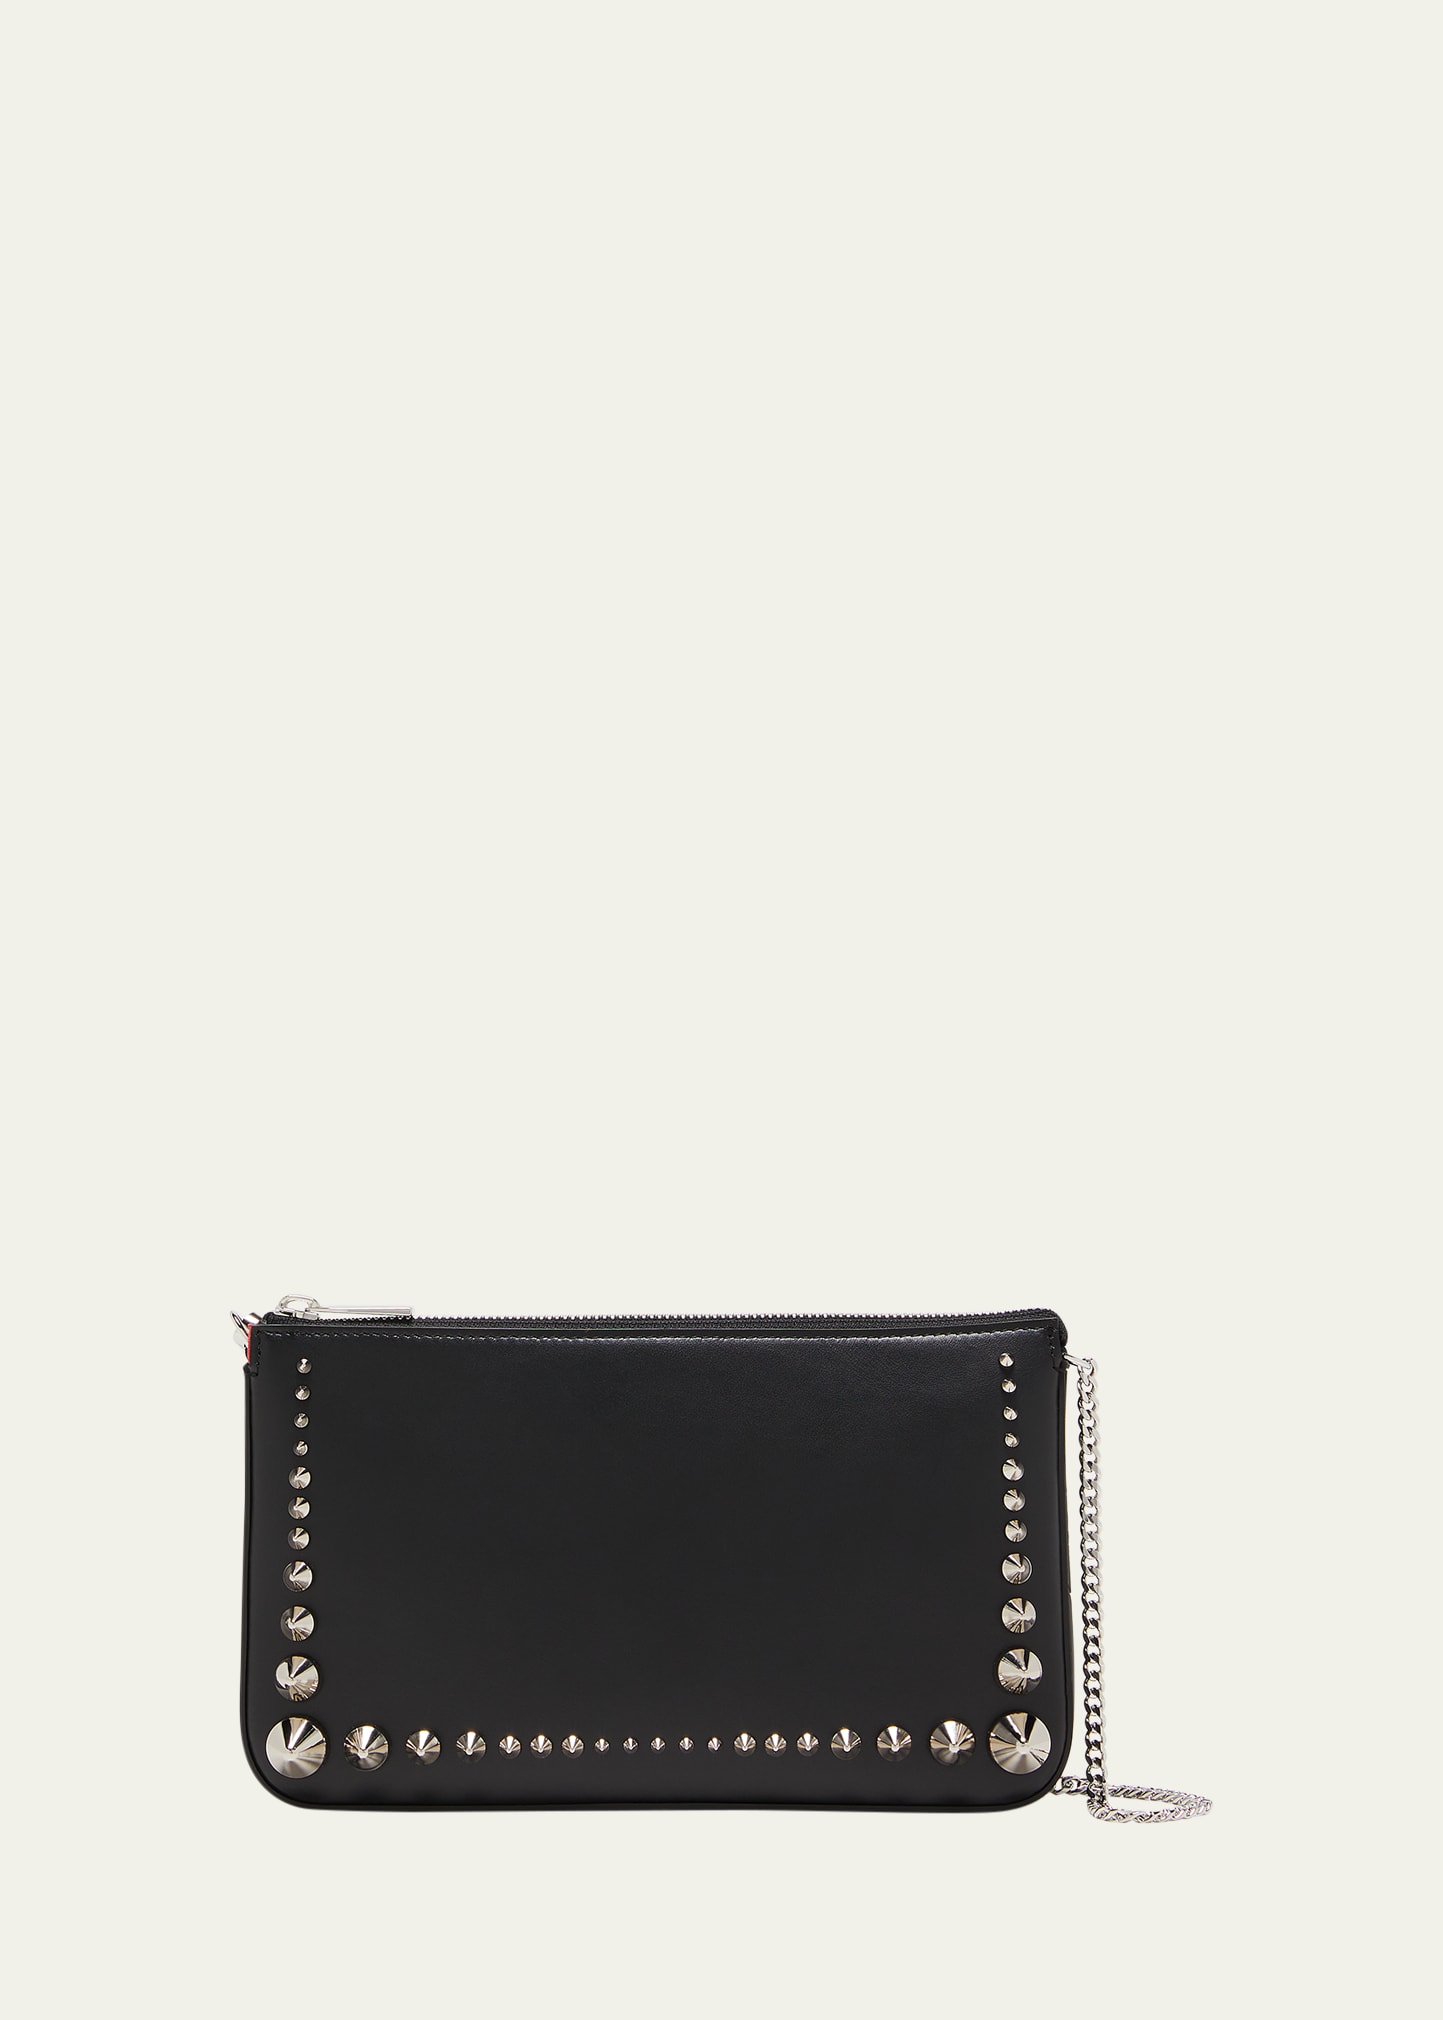 Loubila Shoulder Bag in Leather with Degrade Spikes